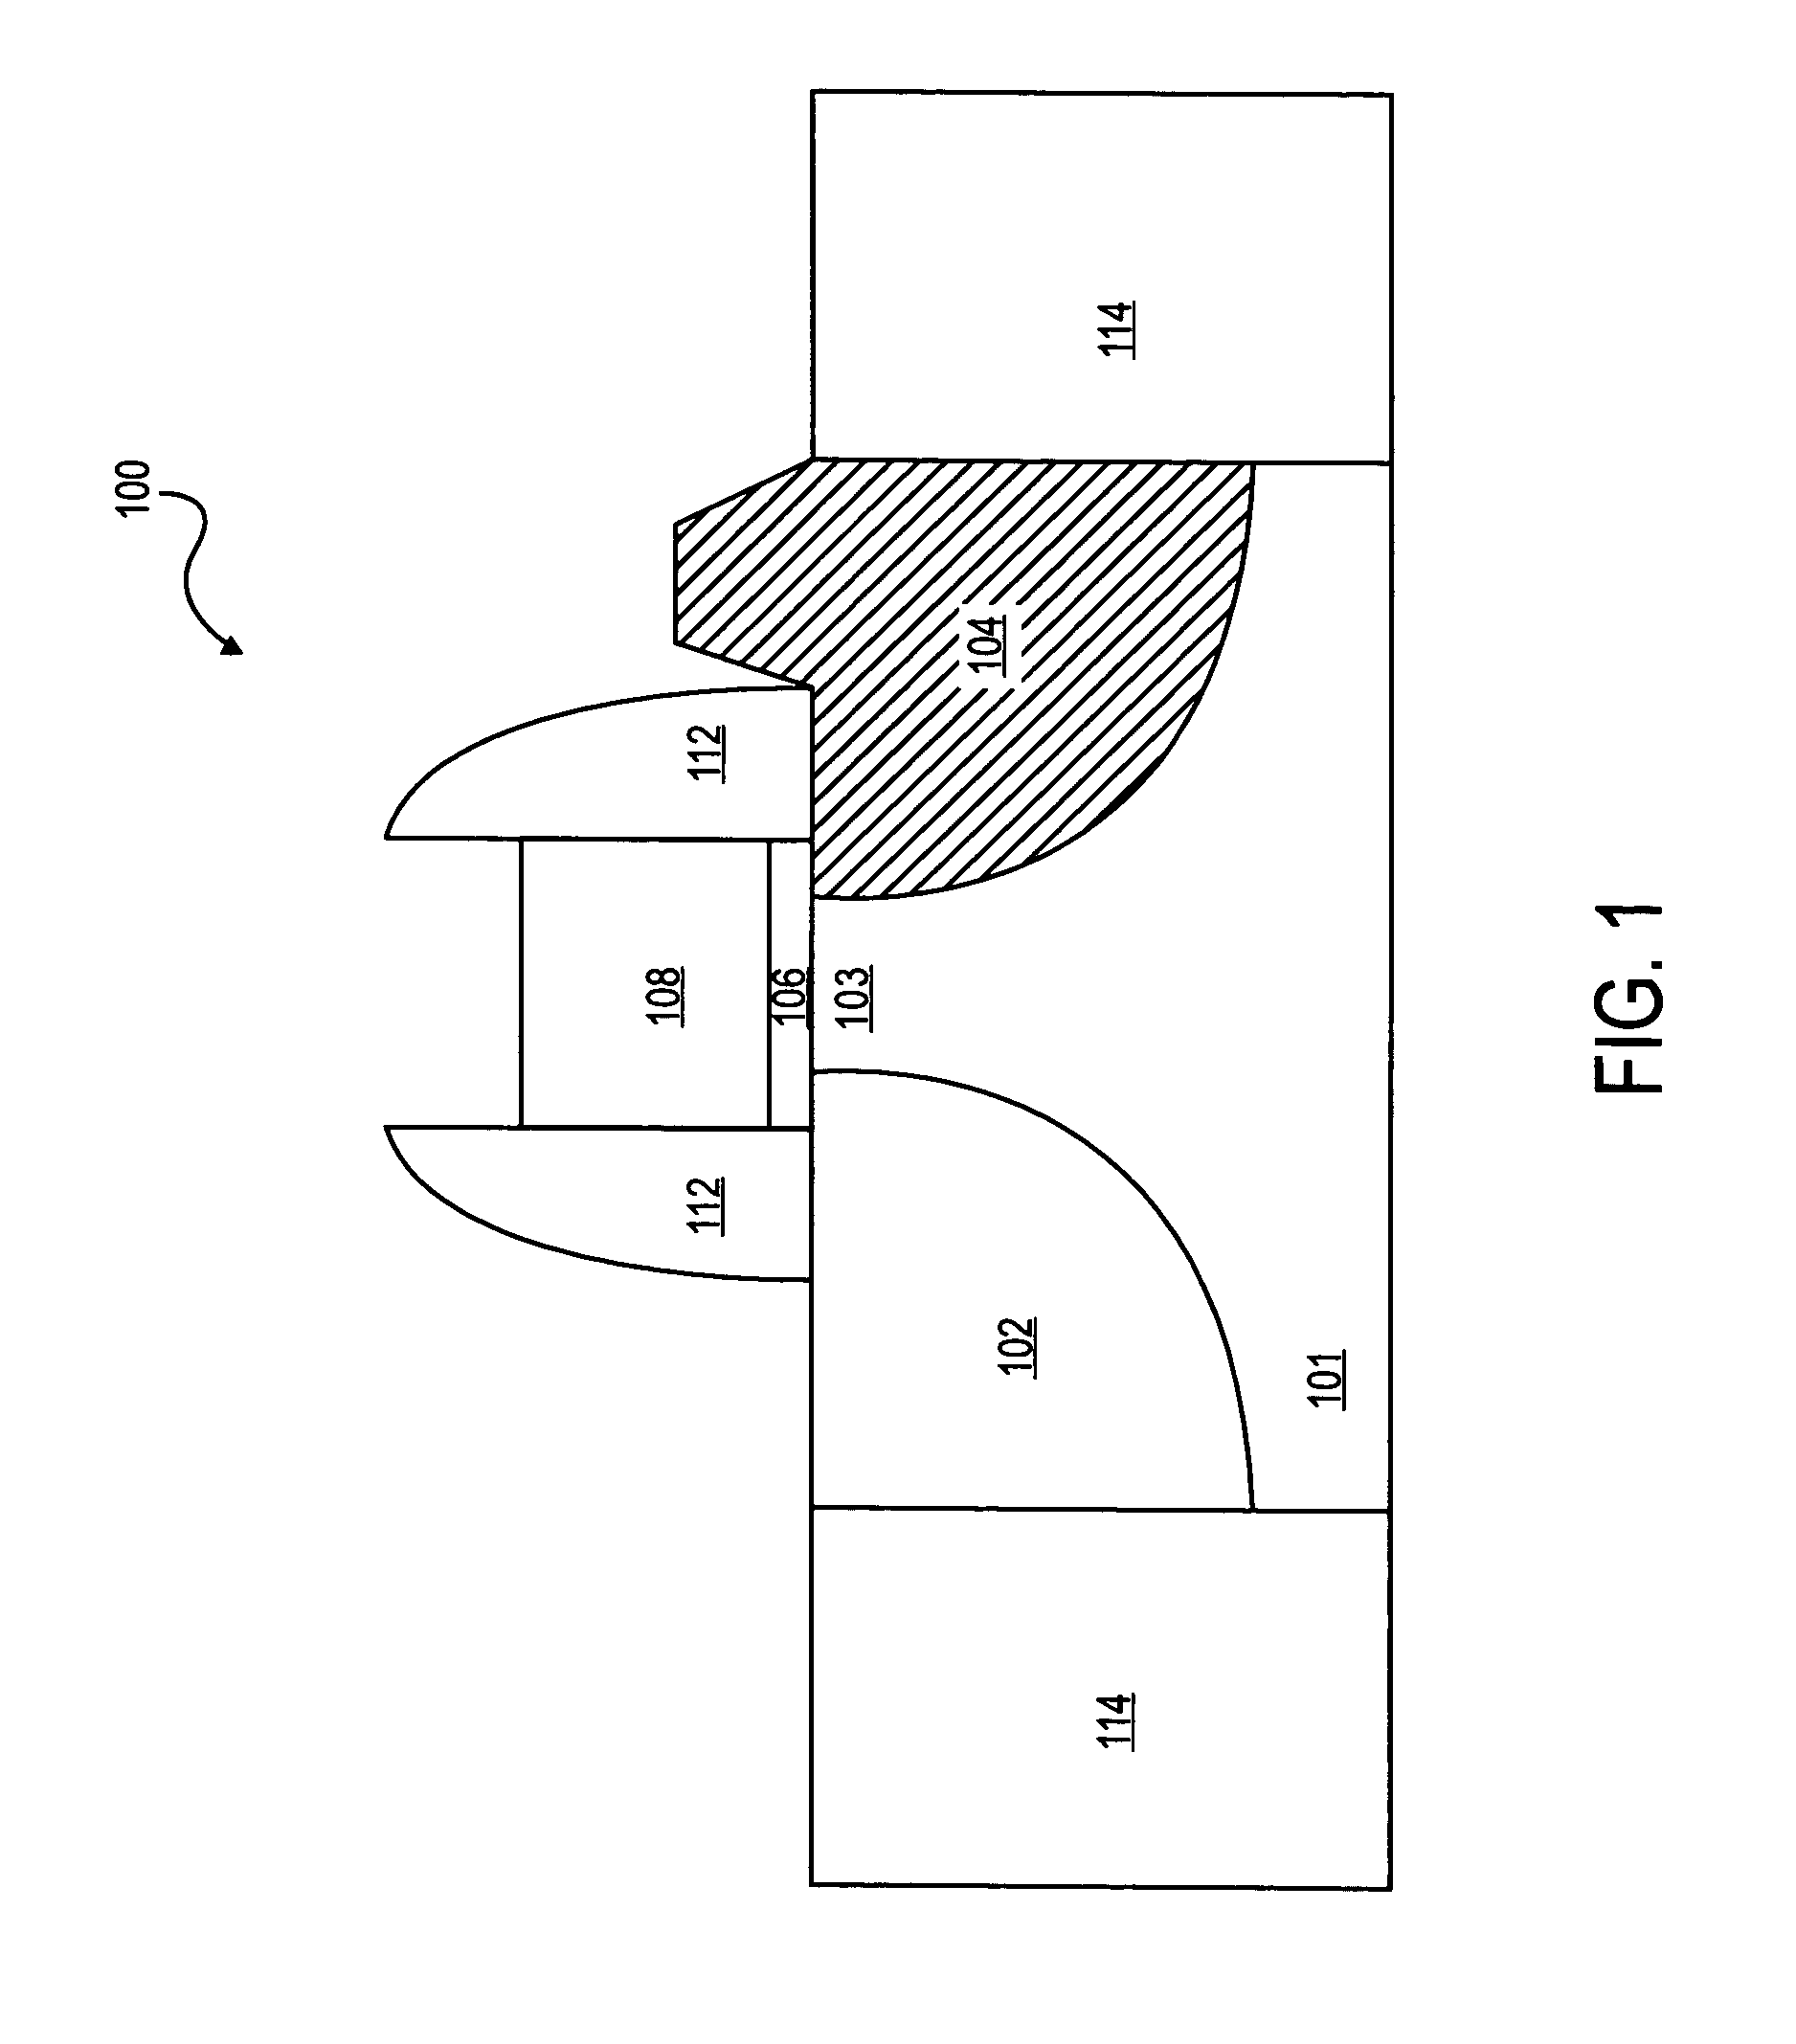 Tunneling field effect transistor using angled implants for forming asymmetric source/drain regions